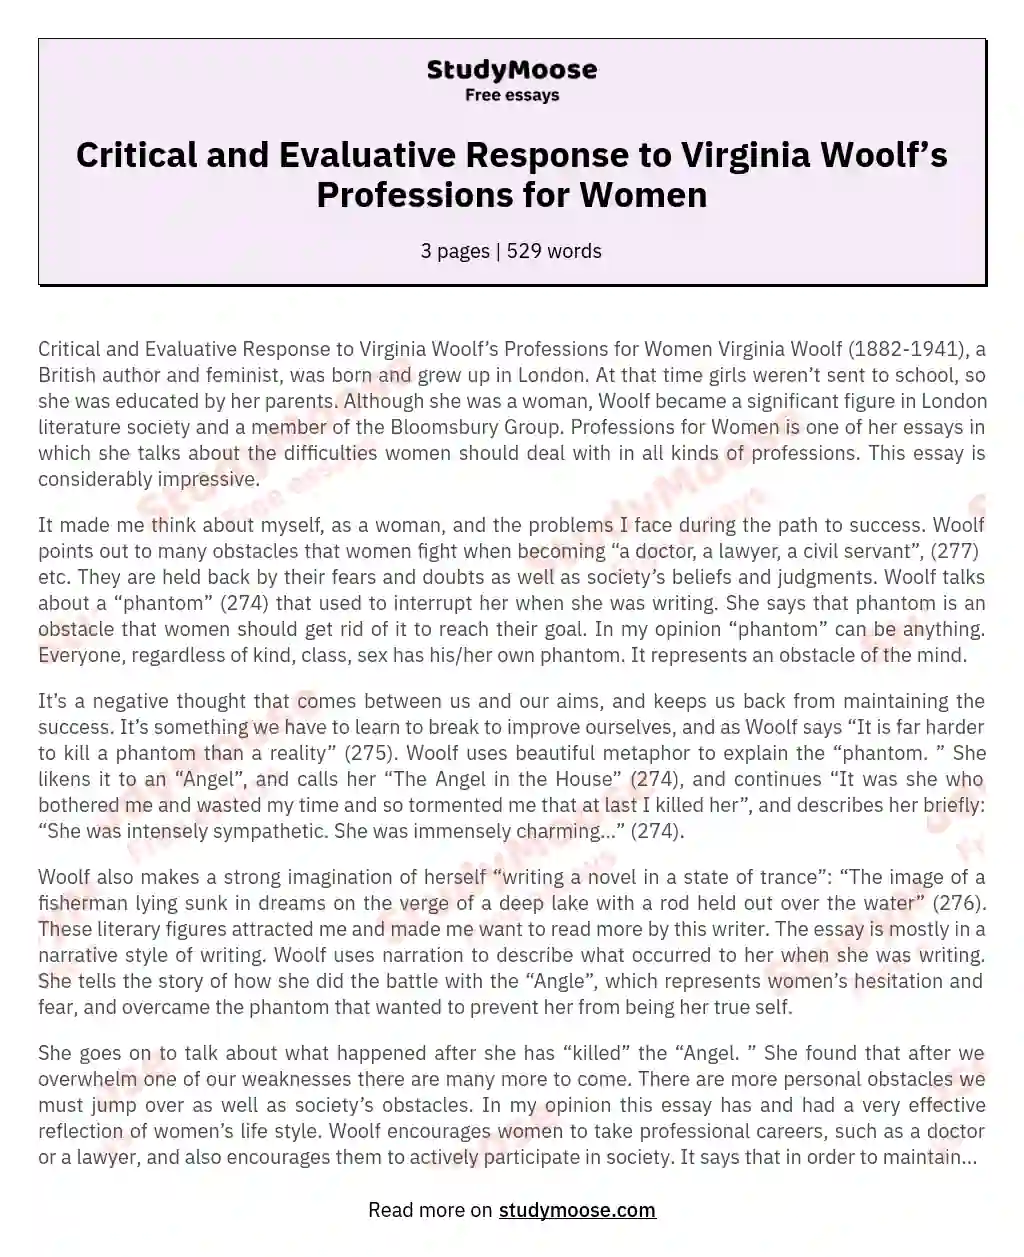 Critical and Evaluative Response to Virginia Woolf’s Professions for Women